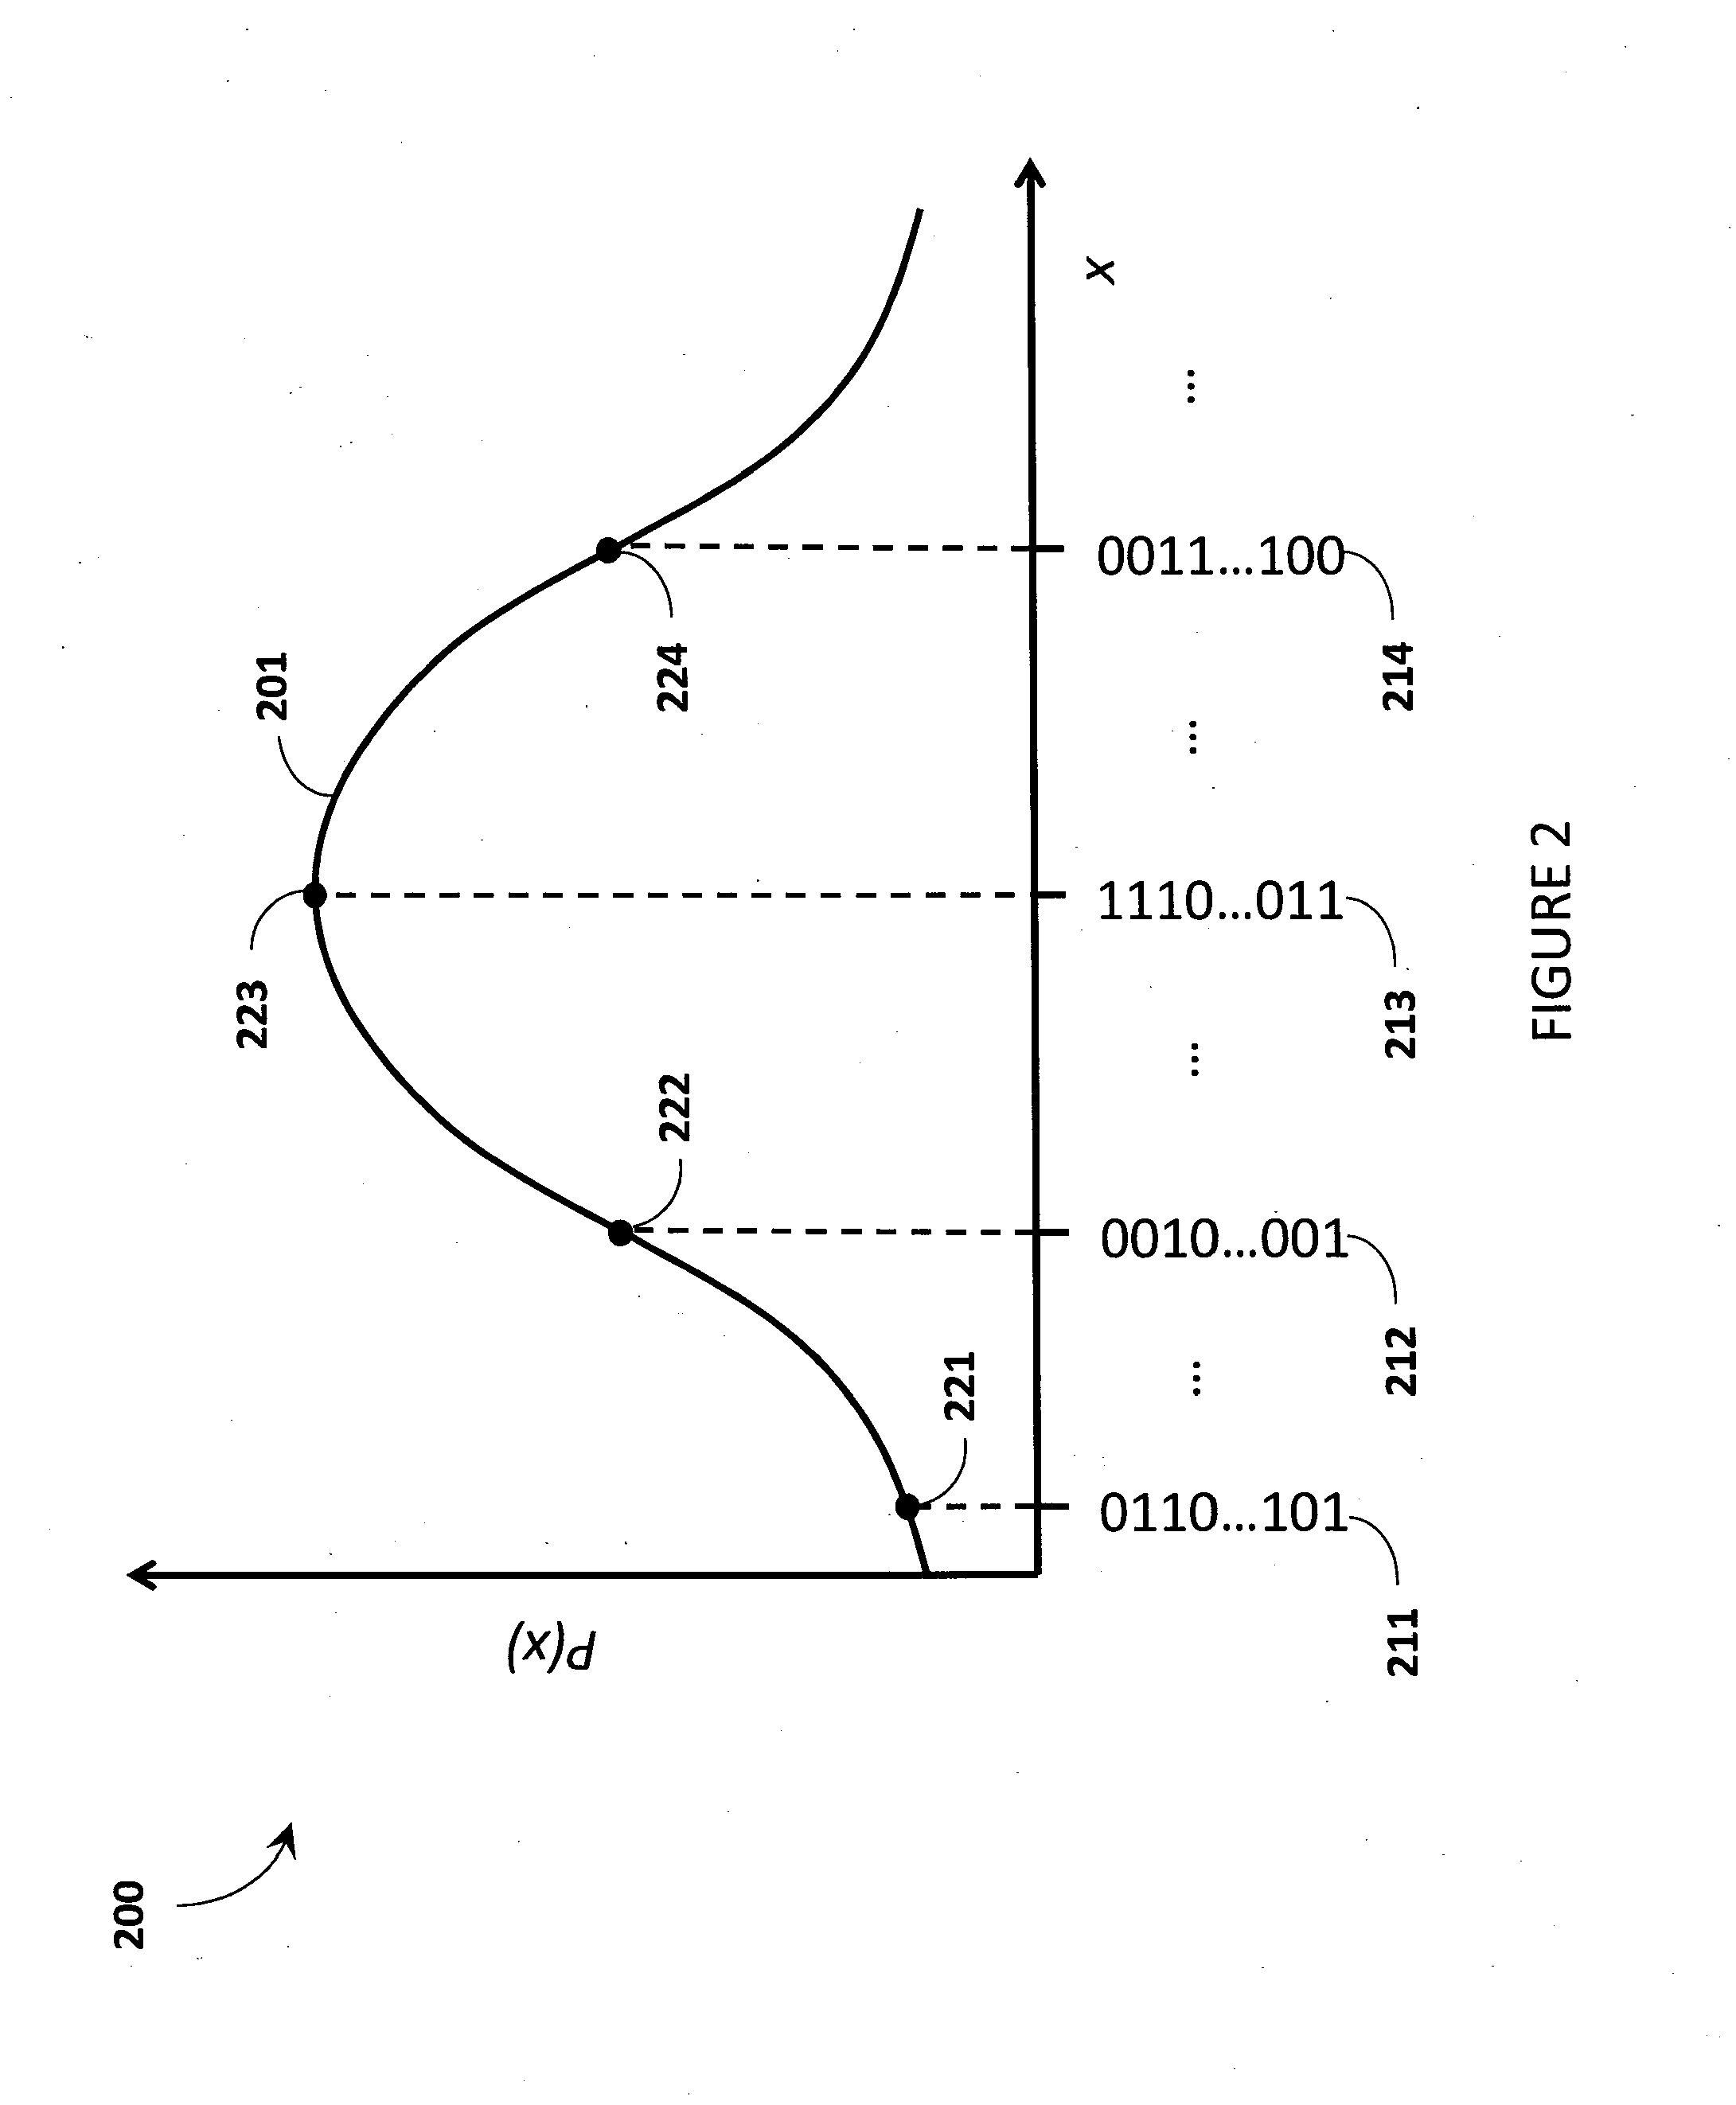 Quantum processor based systems and methods that minimize an objective function